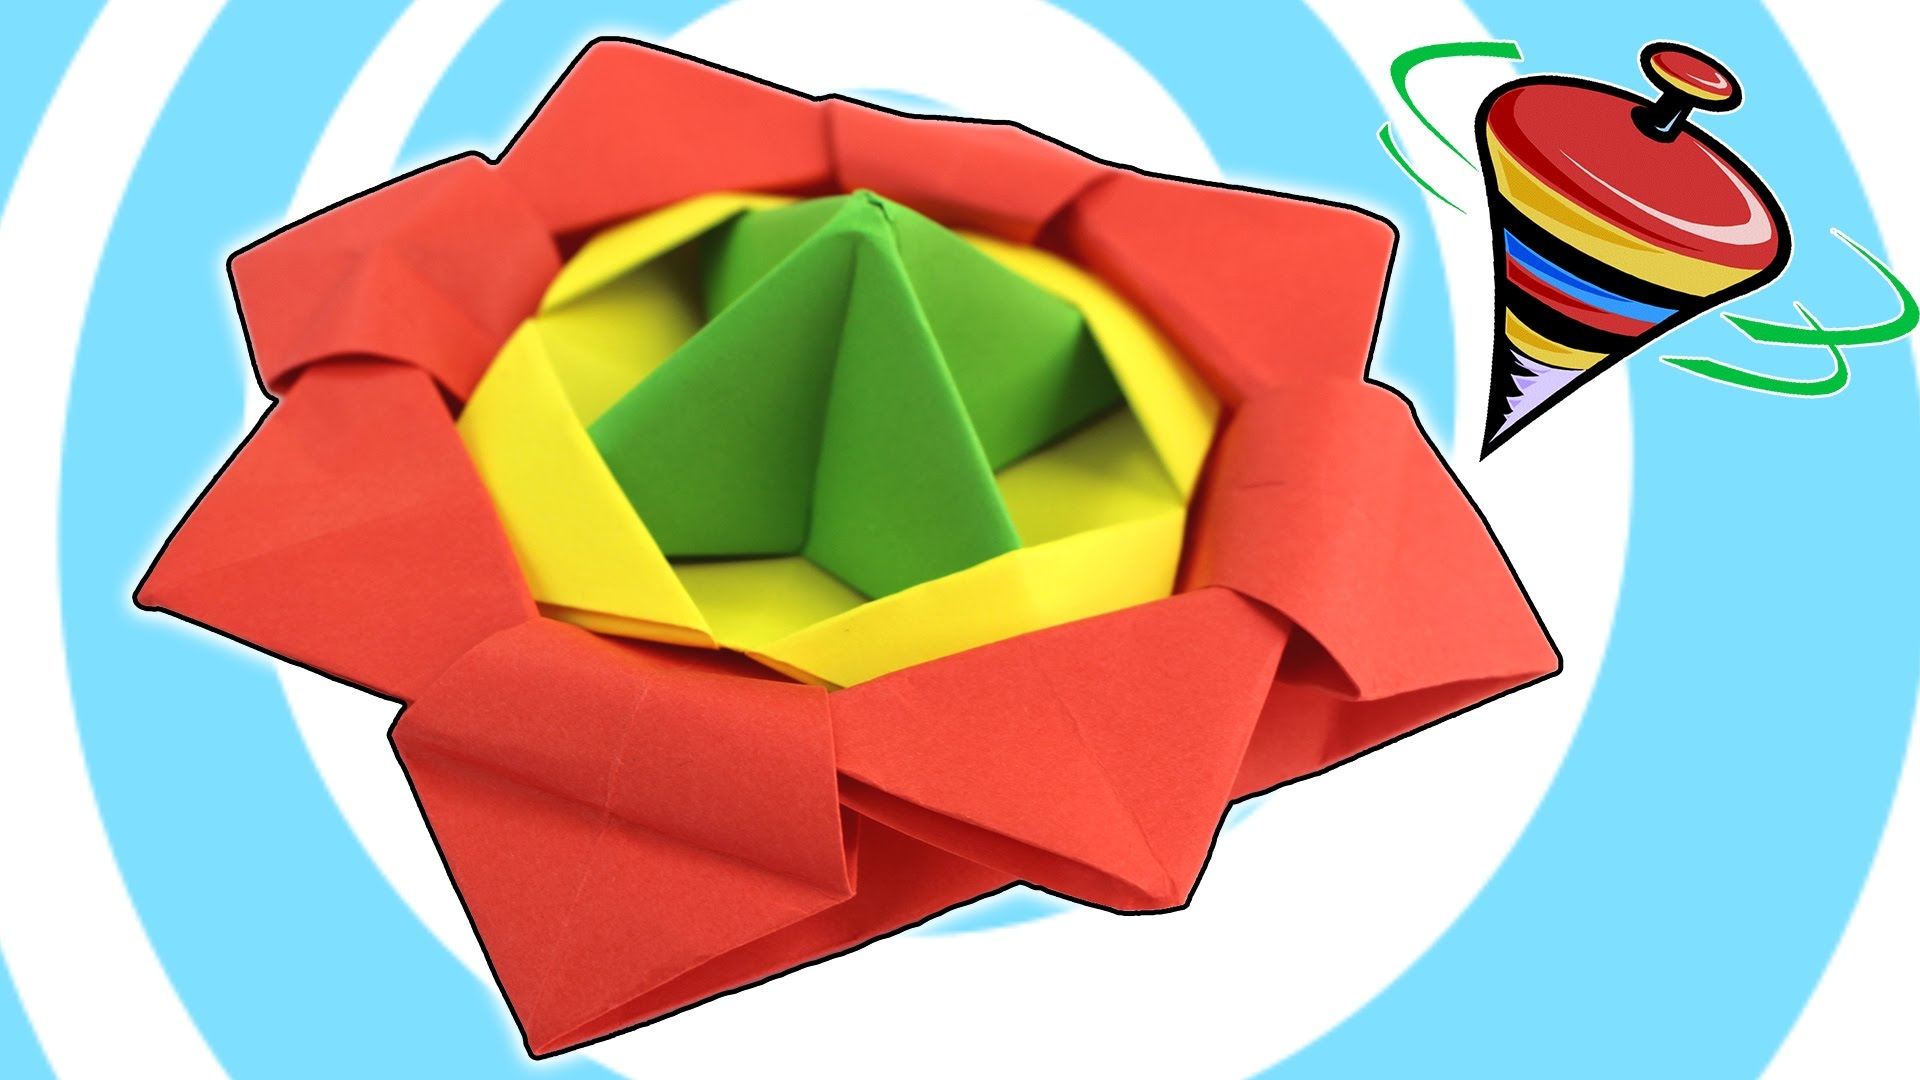 How To Make Cool Origami Toys Origami And Craft Collections Diy For Kids And Adults